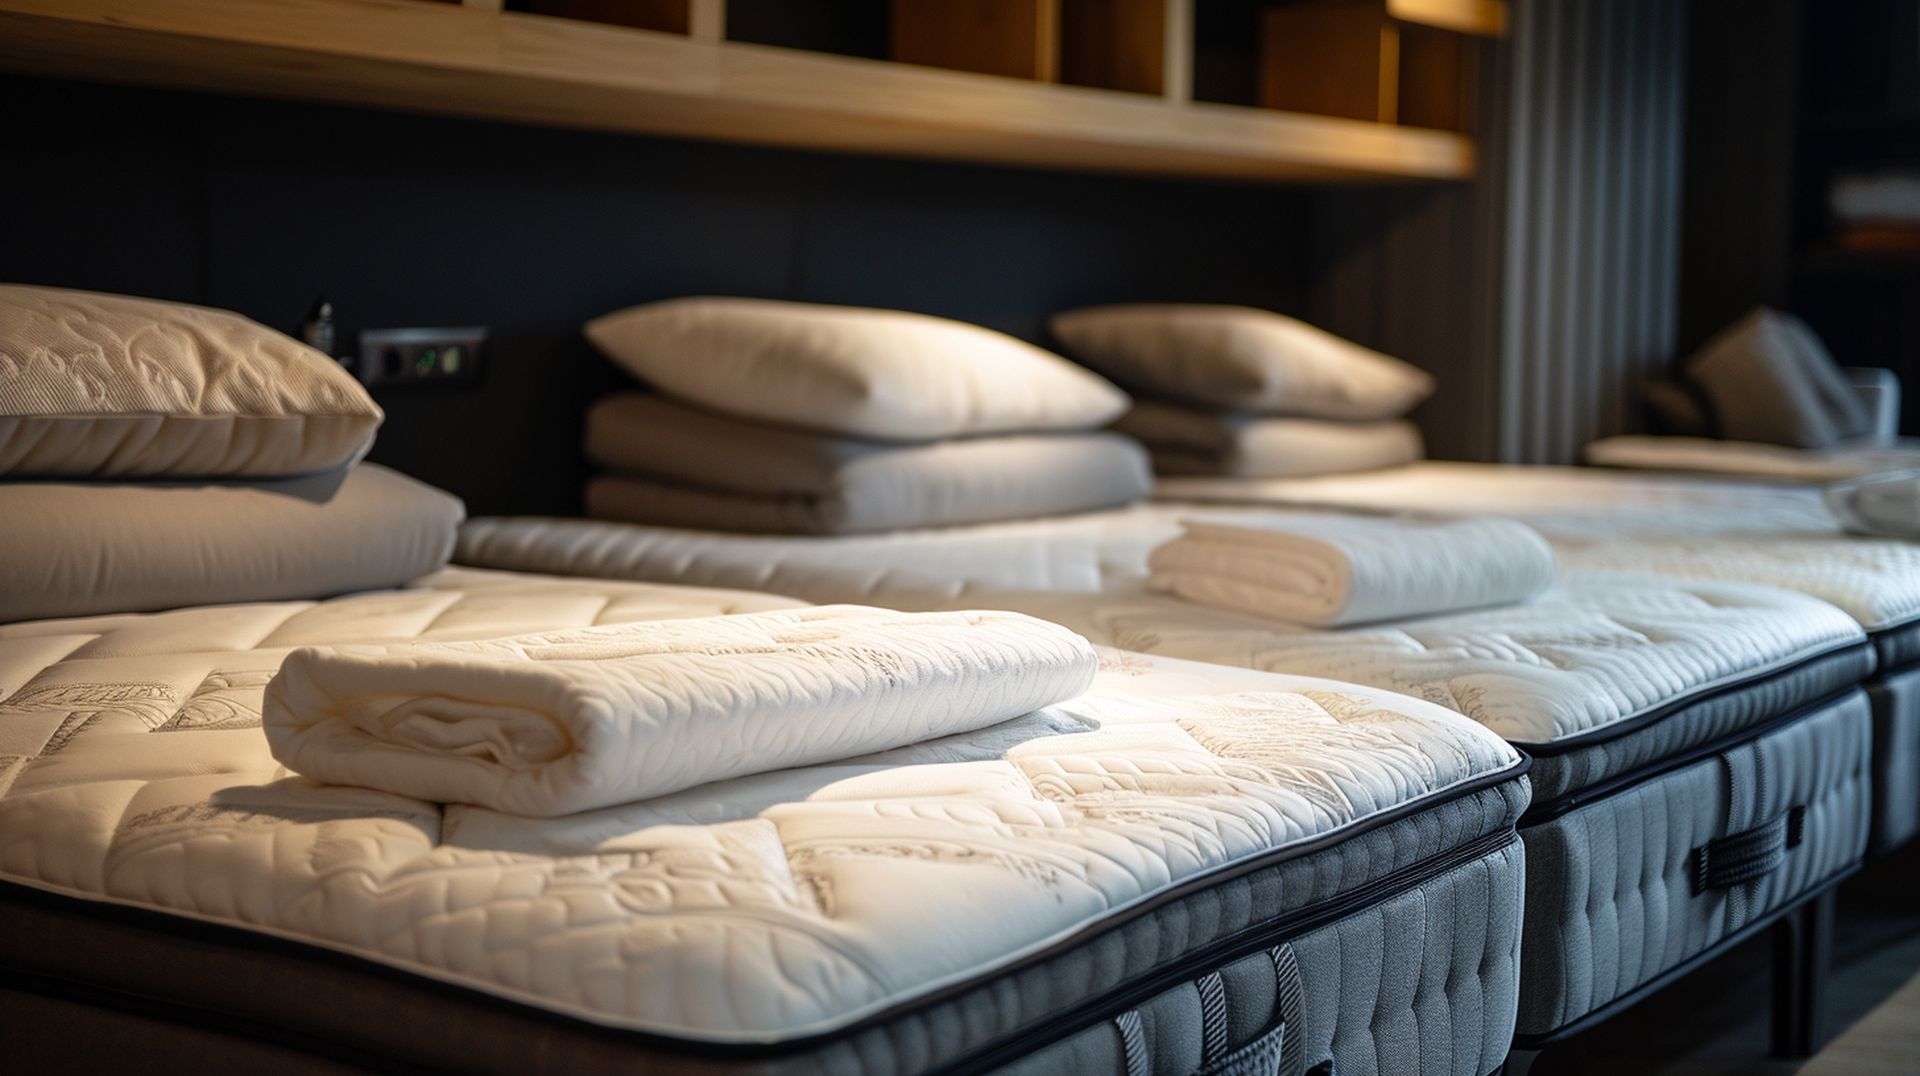 If you're looking for a new bed, mattress stores in Bell Gardens offer the best customer and delivery service, financing, and warranties in California